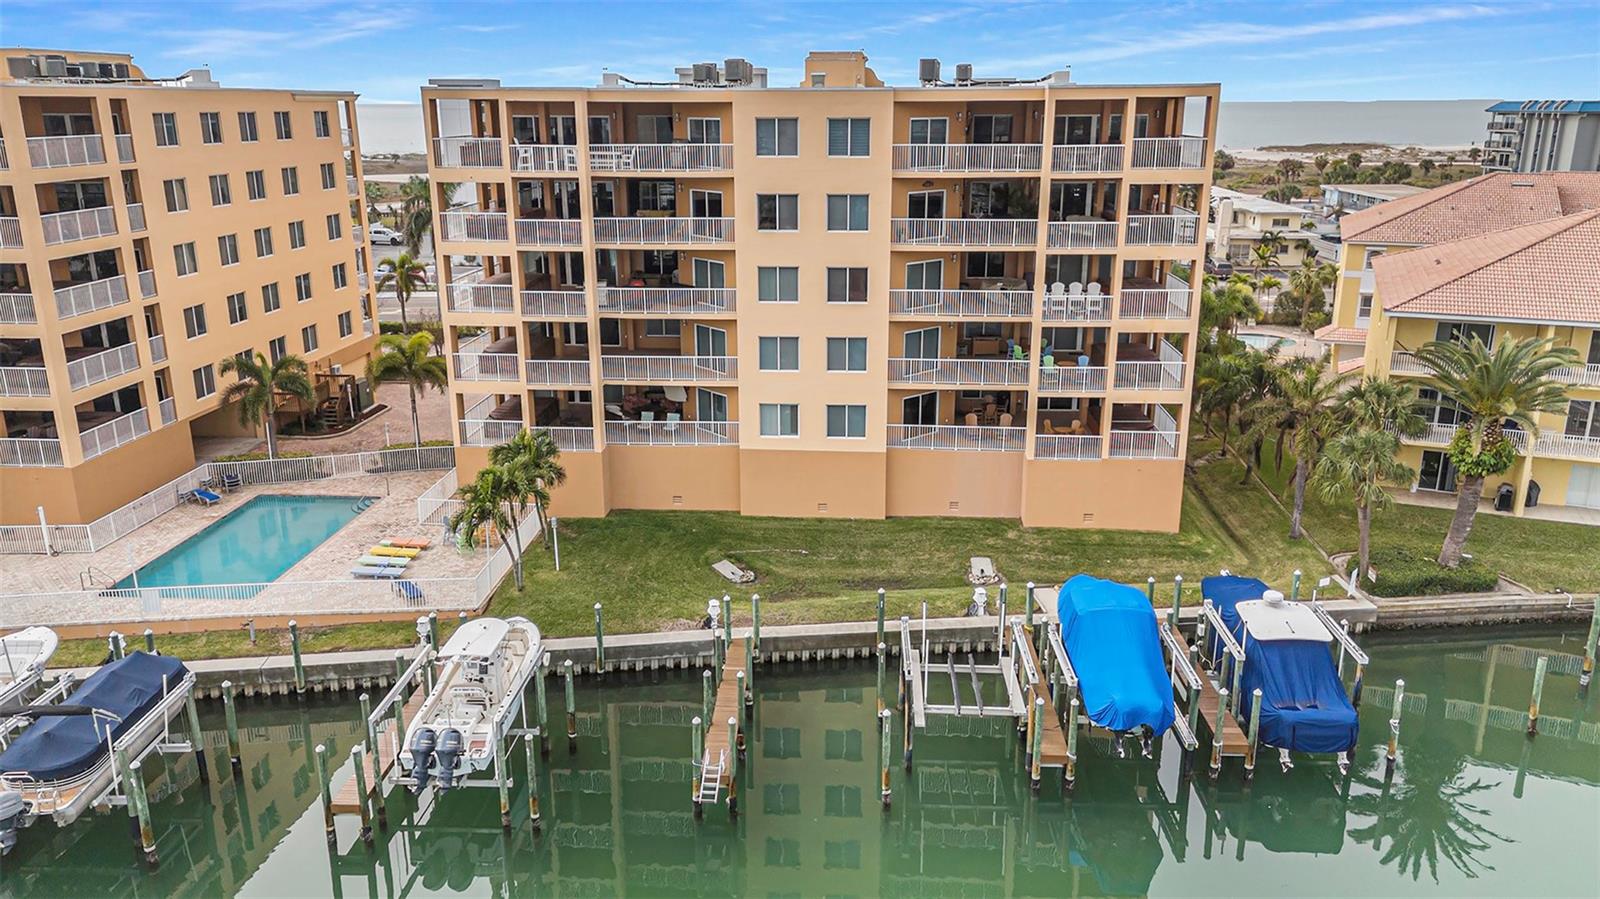 Paved entry welcomes you to your waterfront location between the Gulf of Mexico and intracoastal canal.